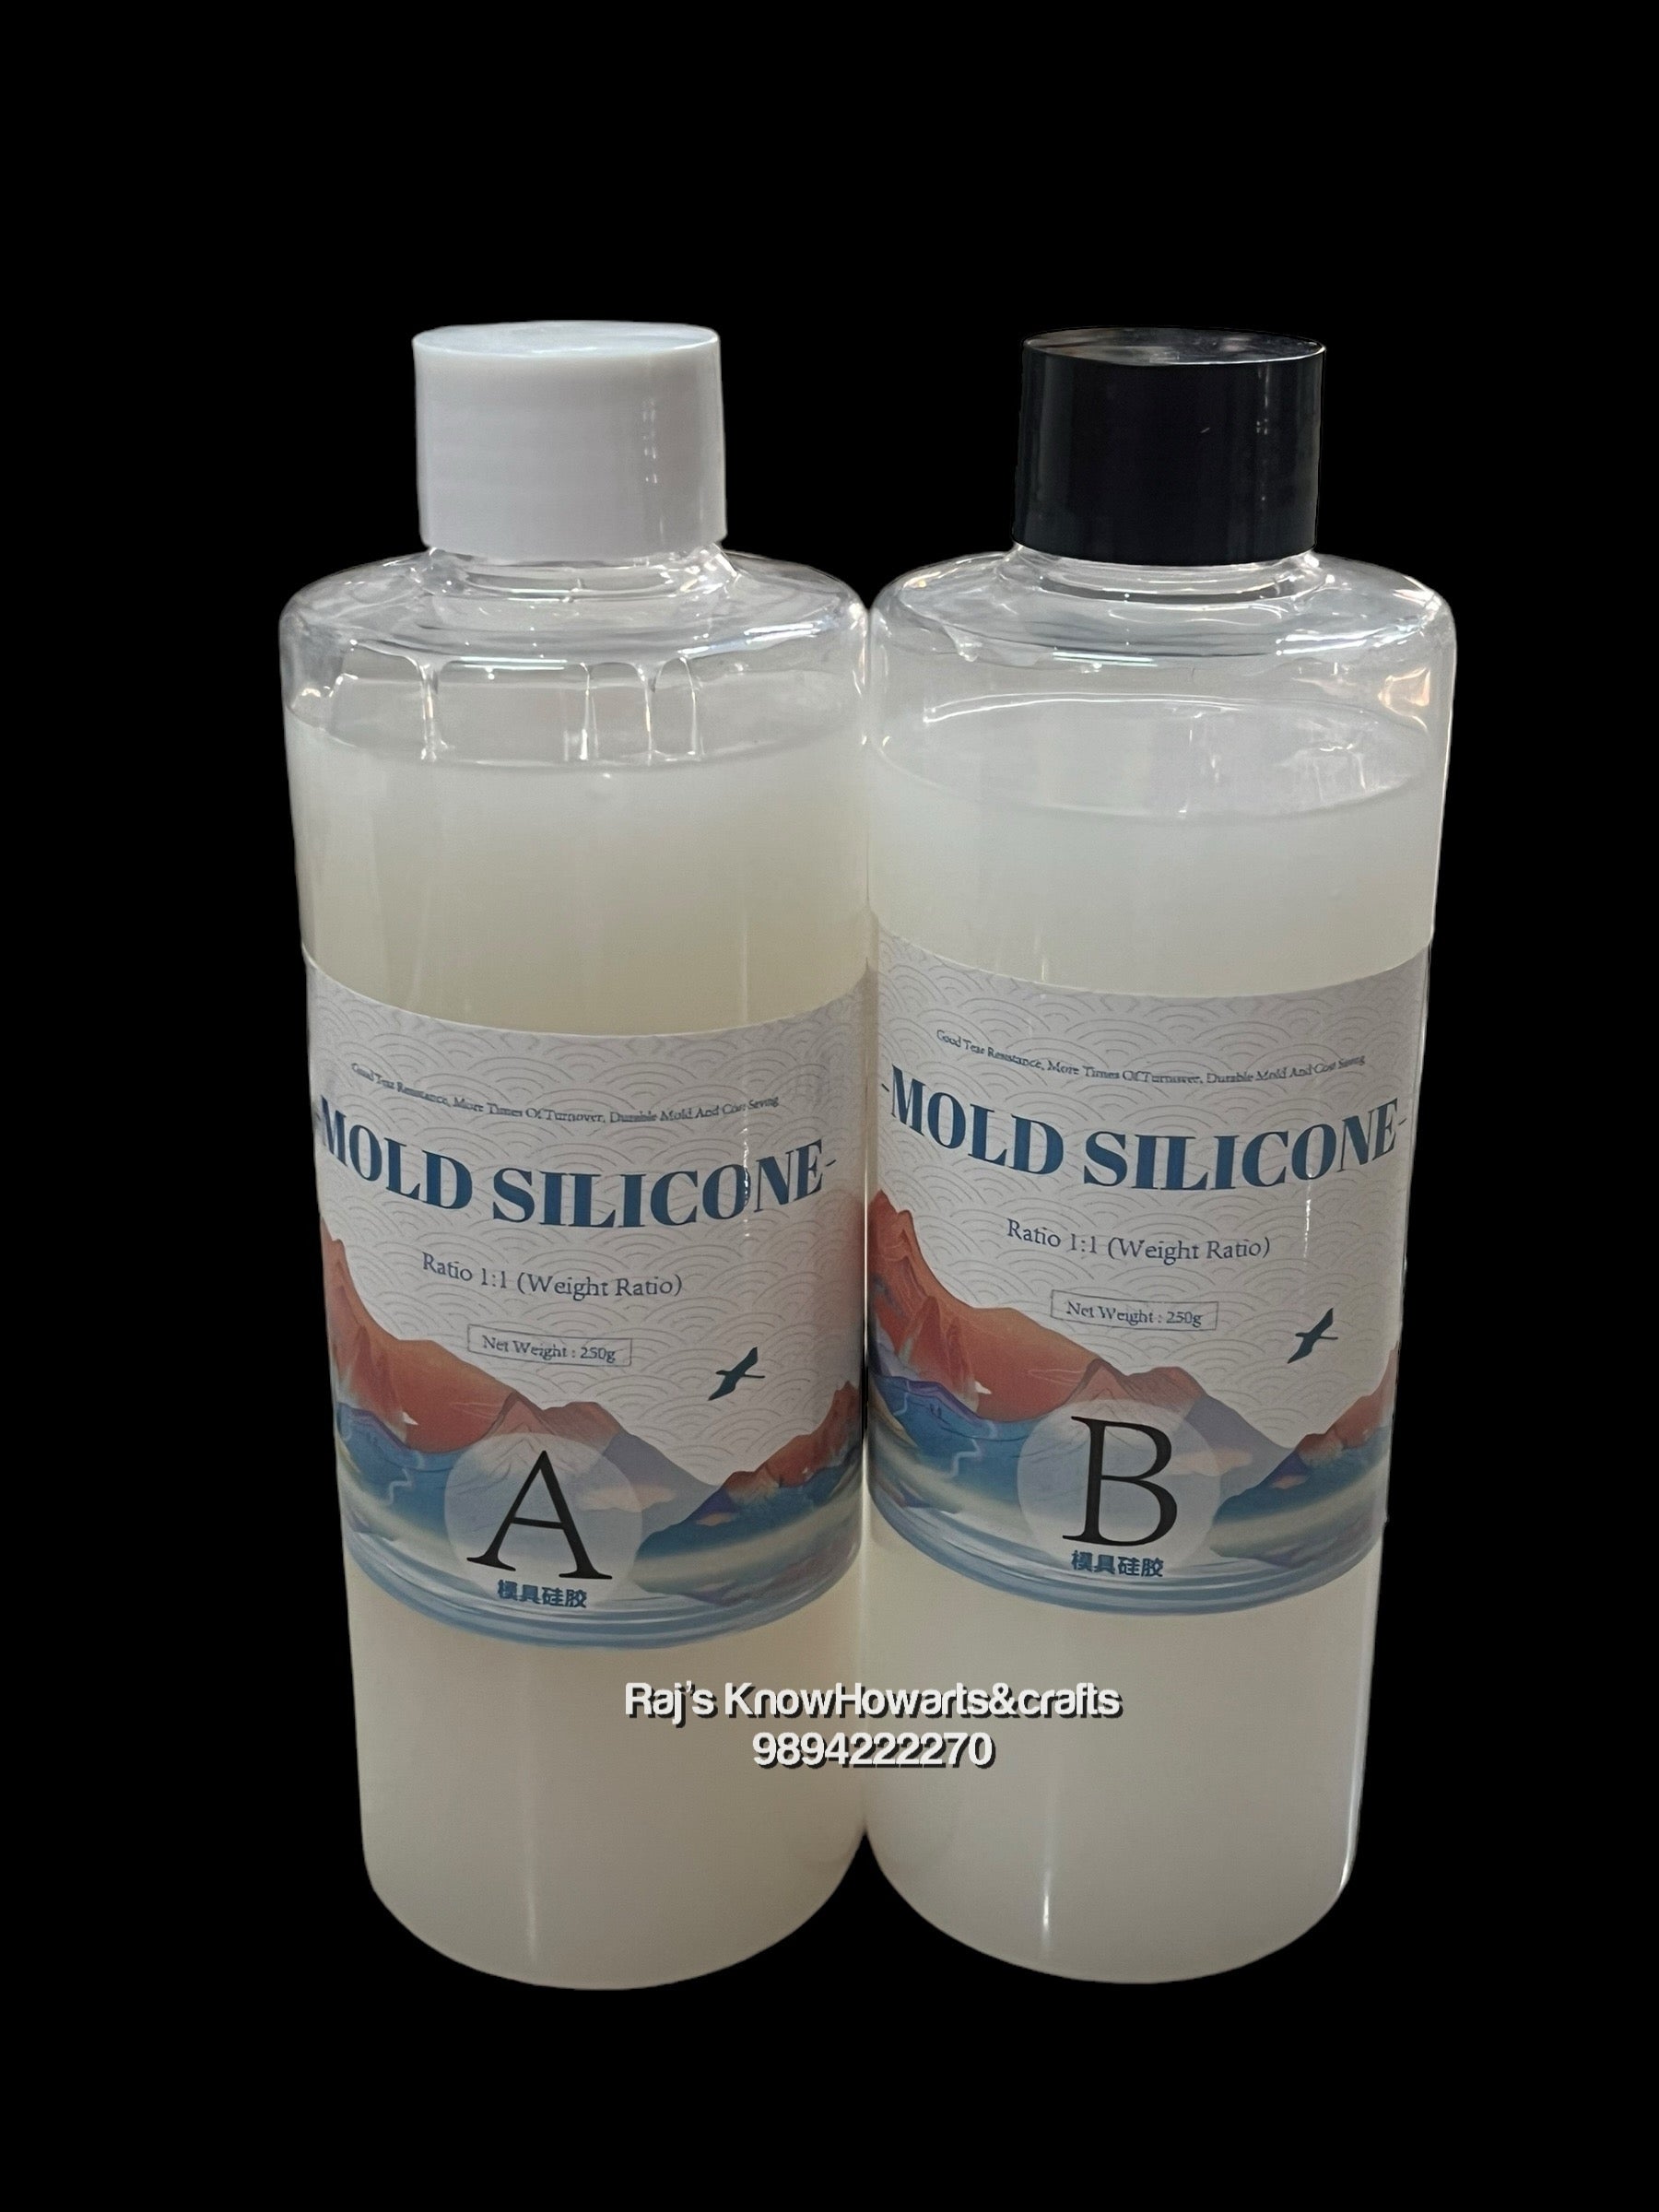 Mold silicone A and B